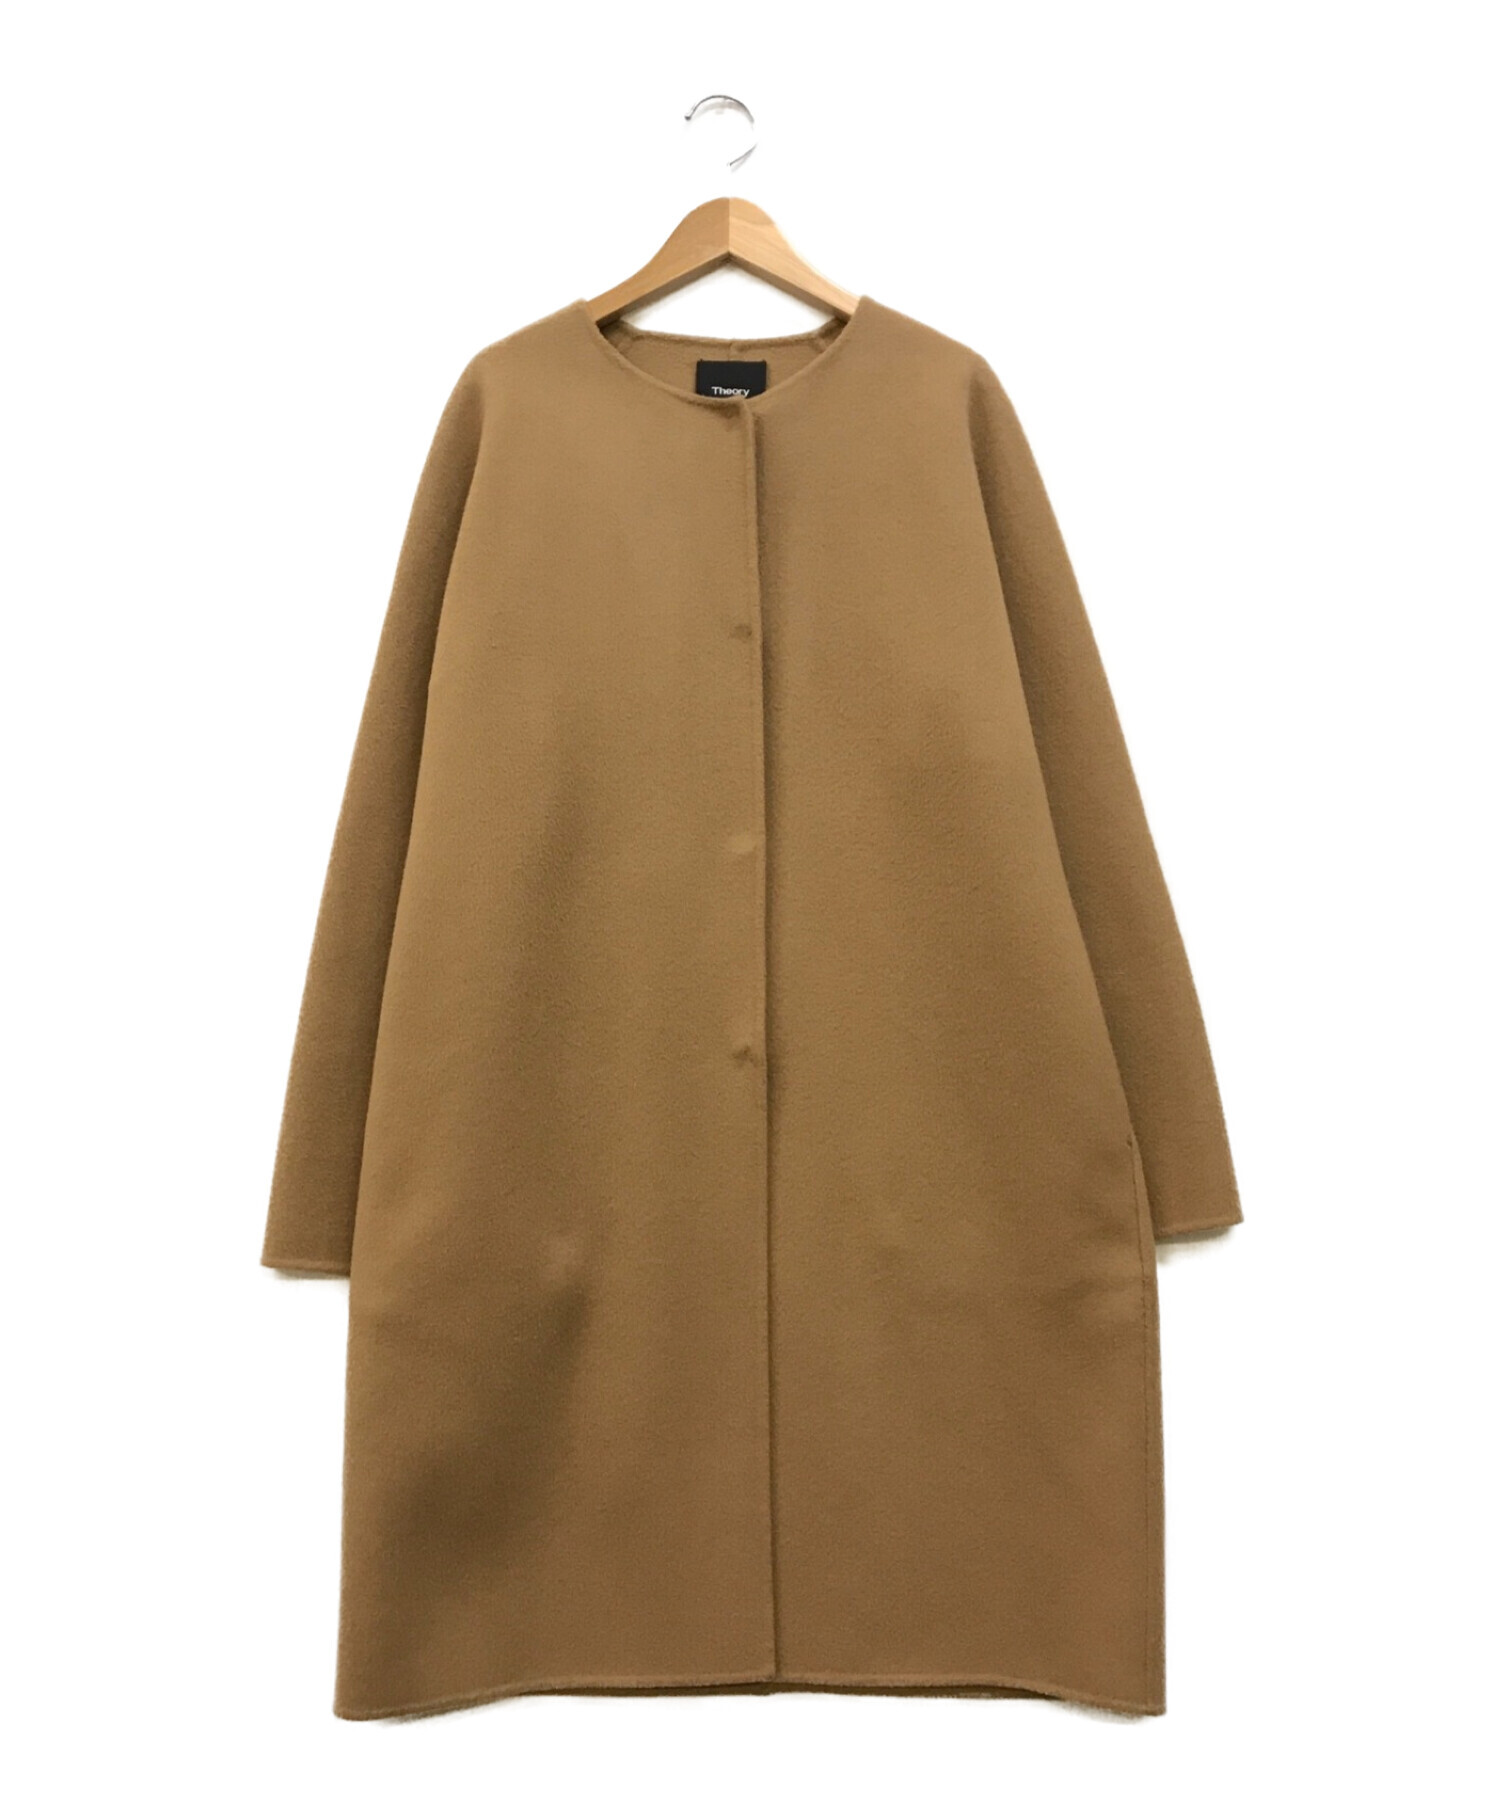 theory (セオリー) NEW DIVIDE LUXE ROUNDED COAT DF ベージュ サイズ:S